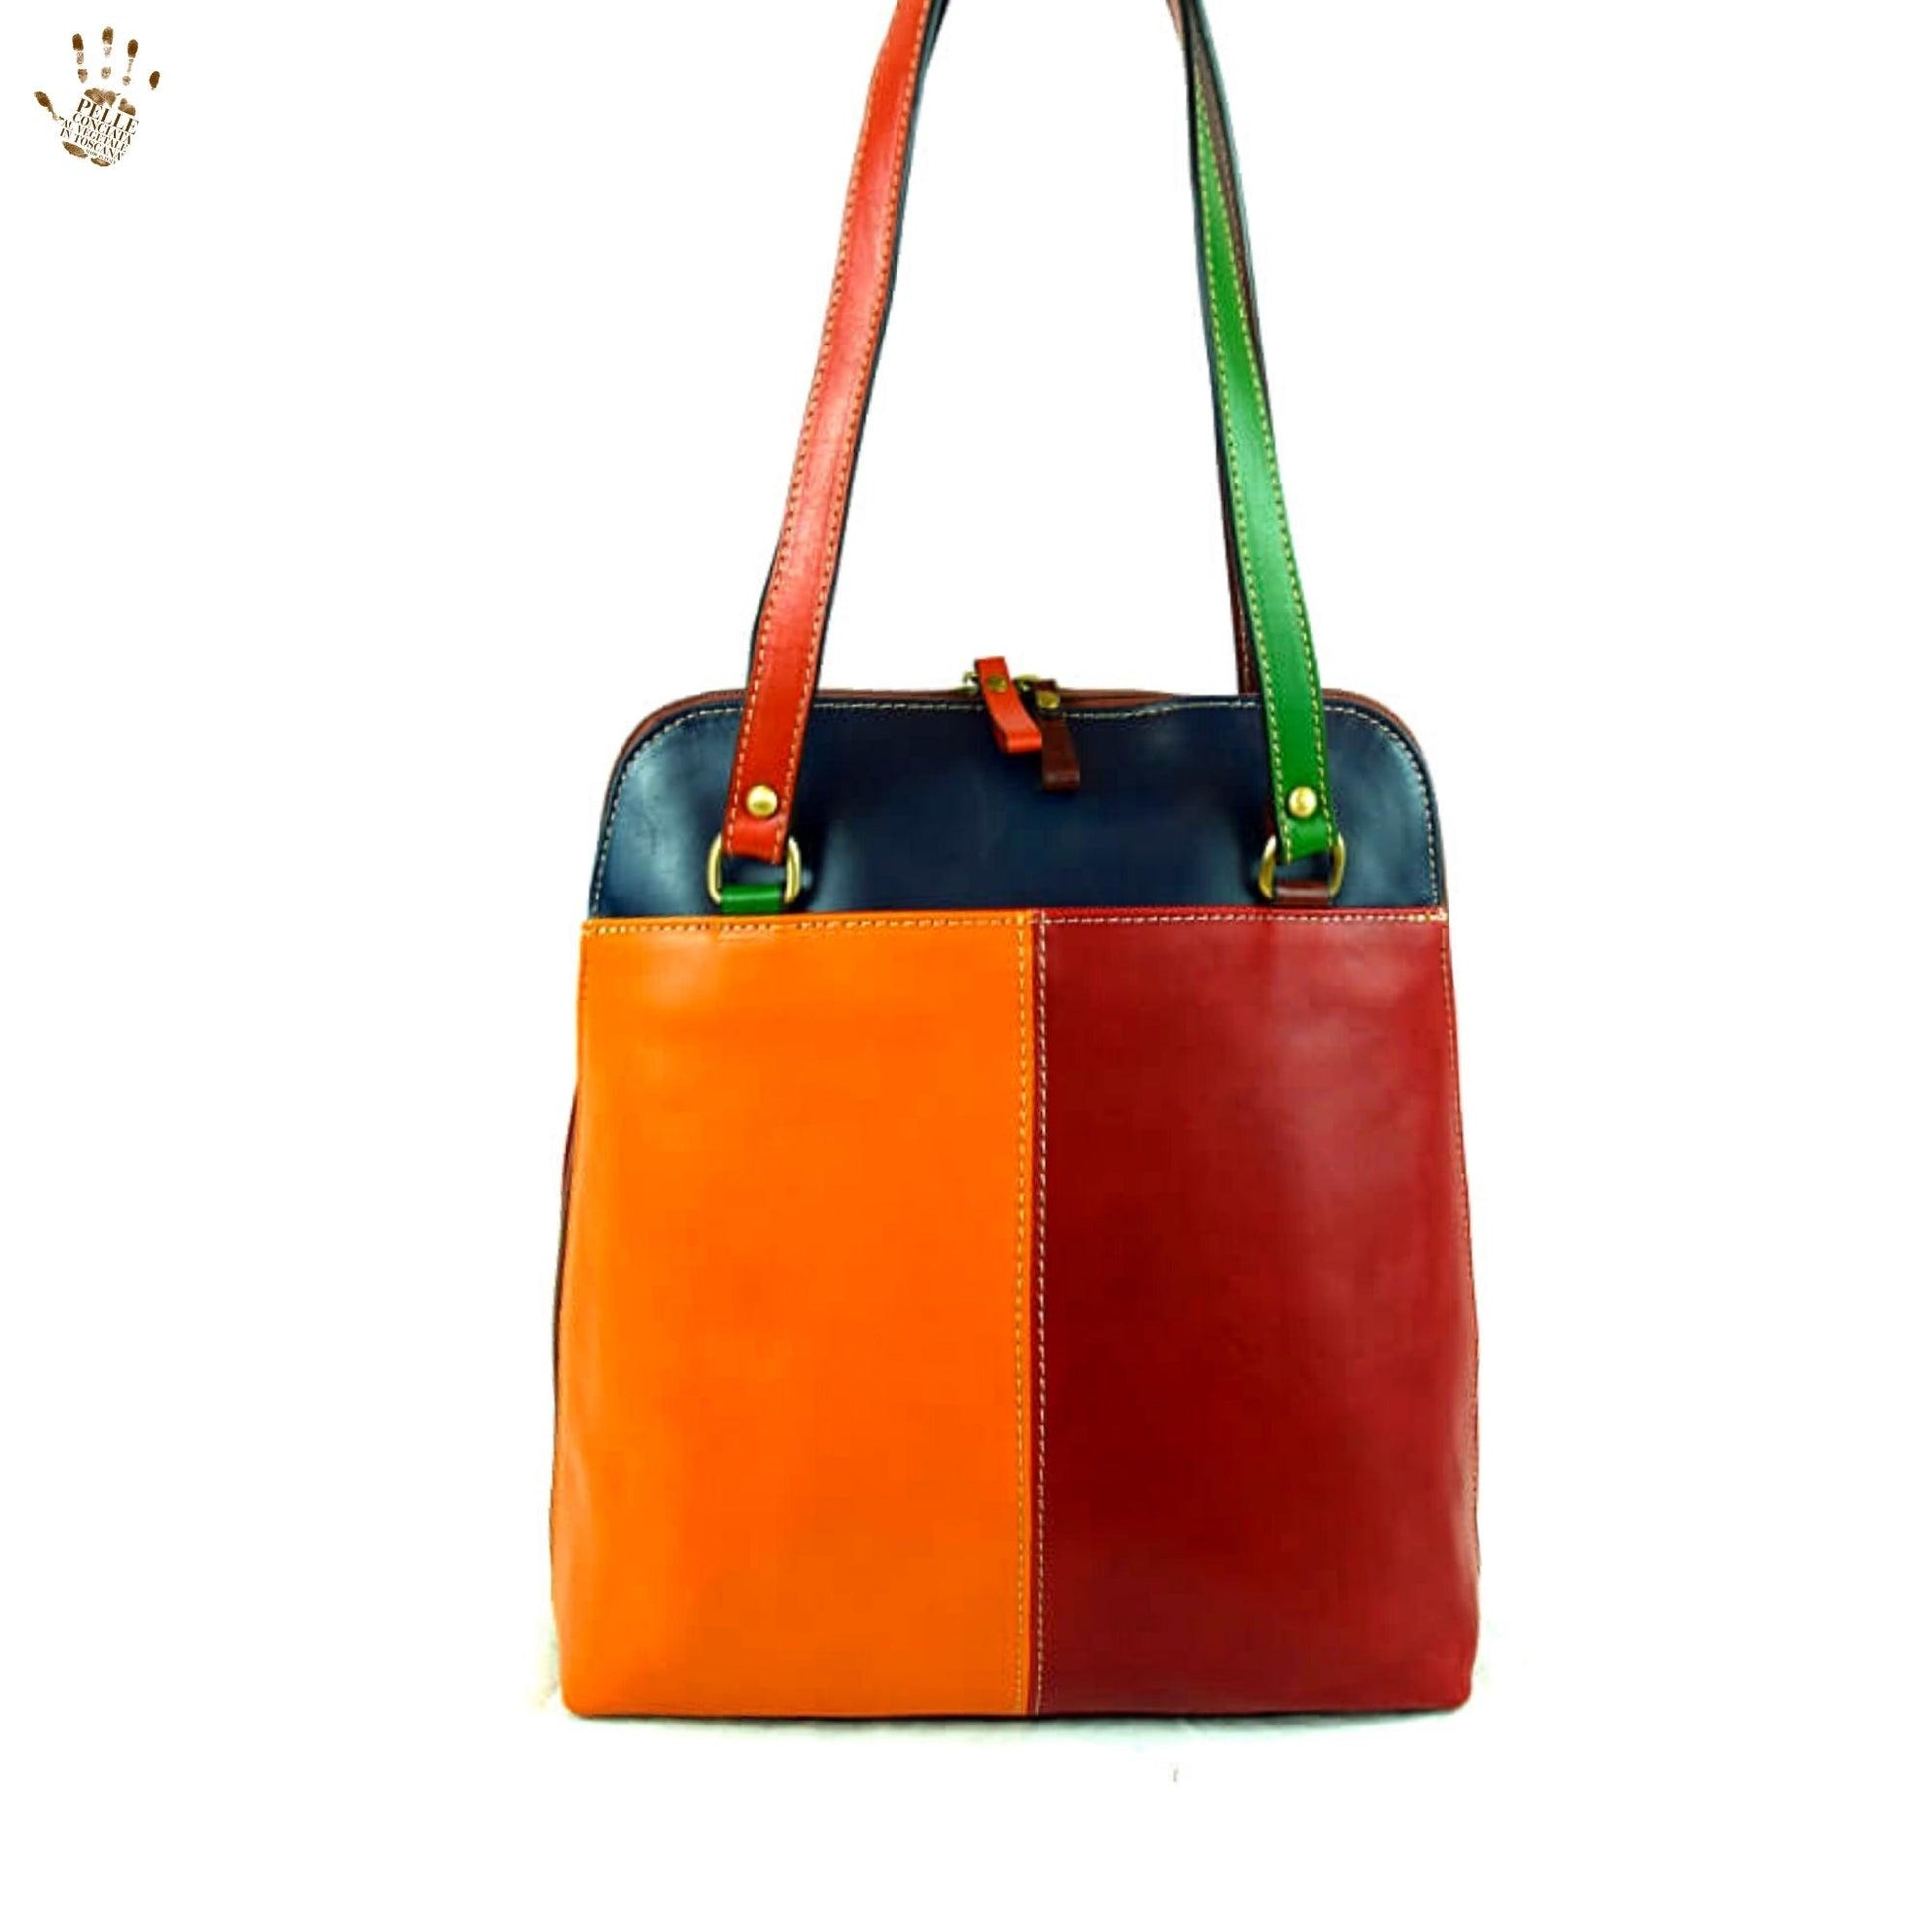 Bags and Accessories in Genuine Leather, Made in Italy - Santini